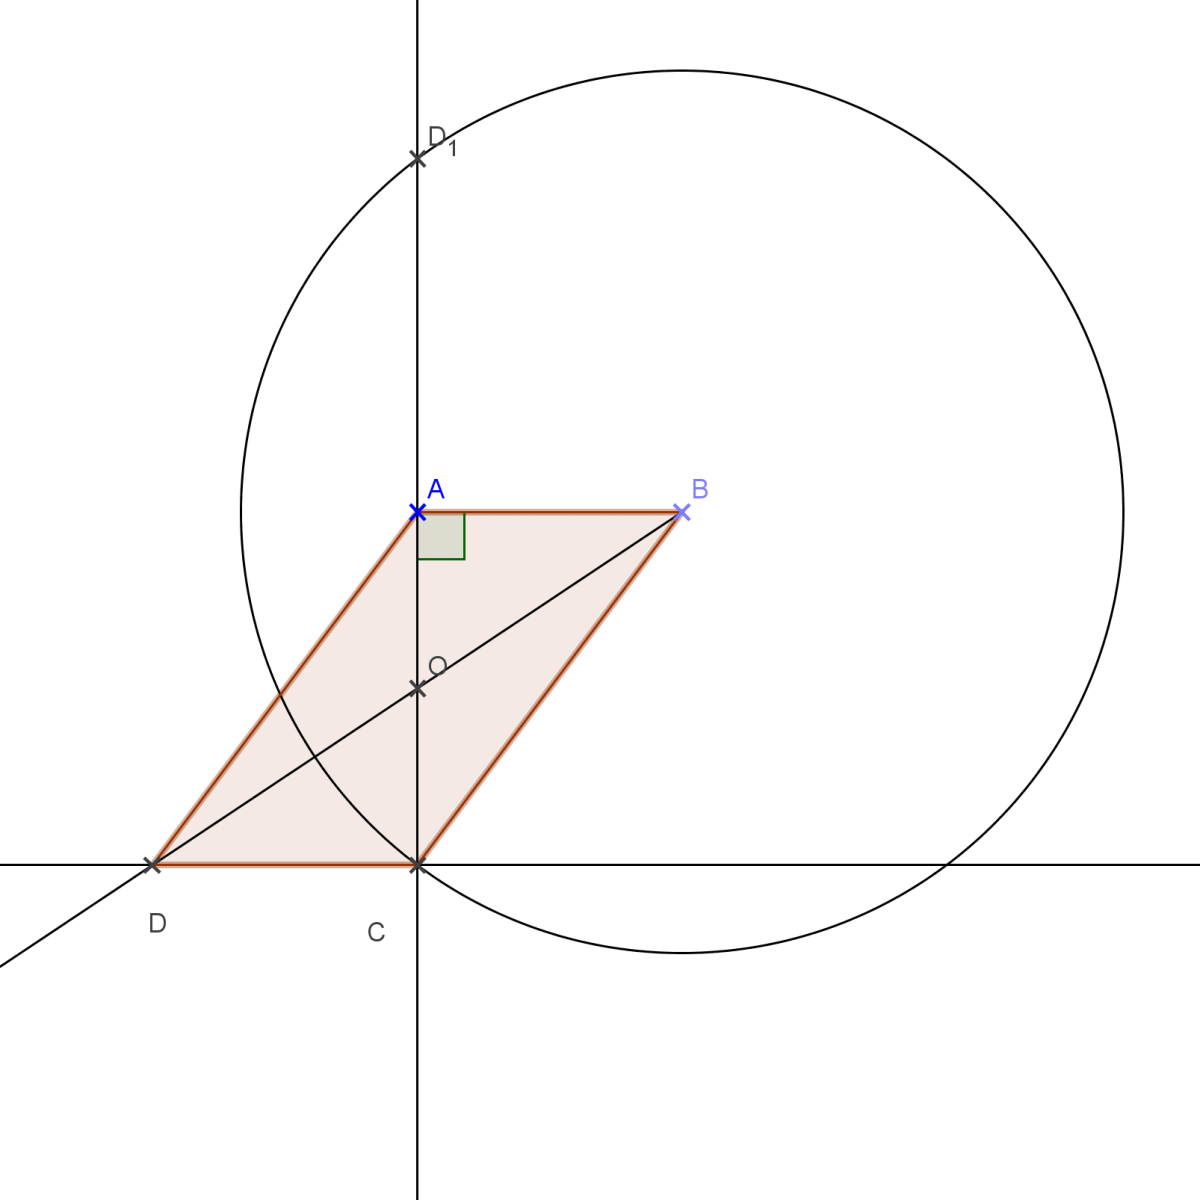 Construct a parallelogram ABCD.